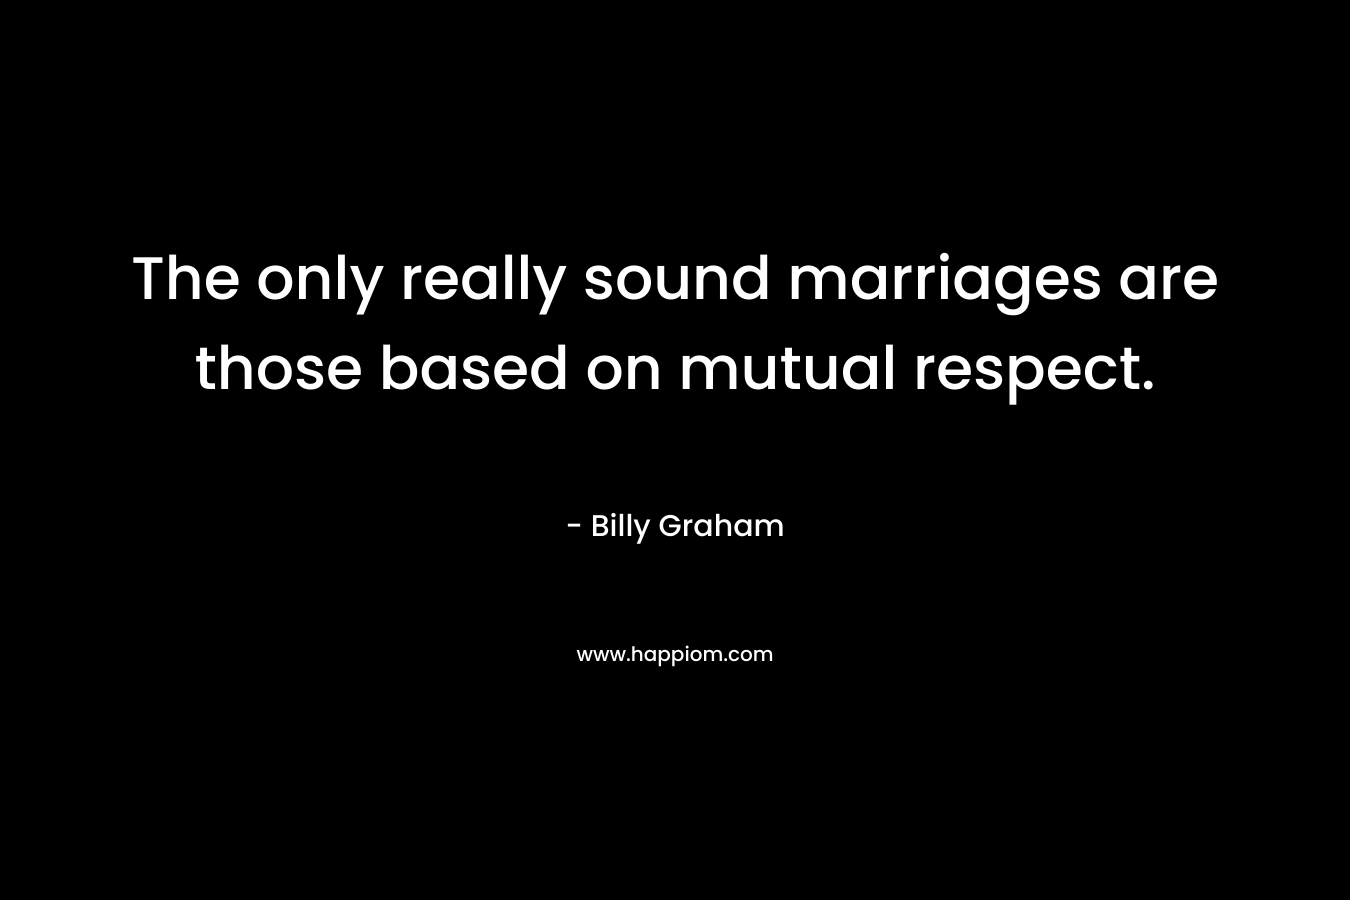 The only really sound marriages are those based on mutual respect. – Billy Graham